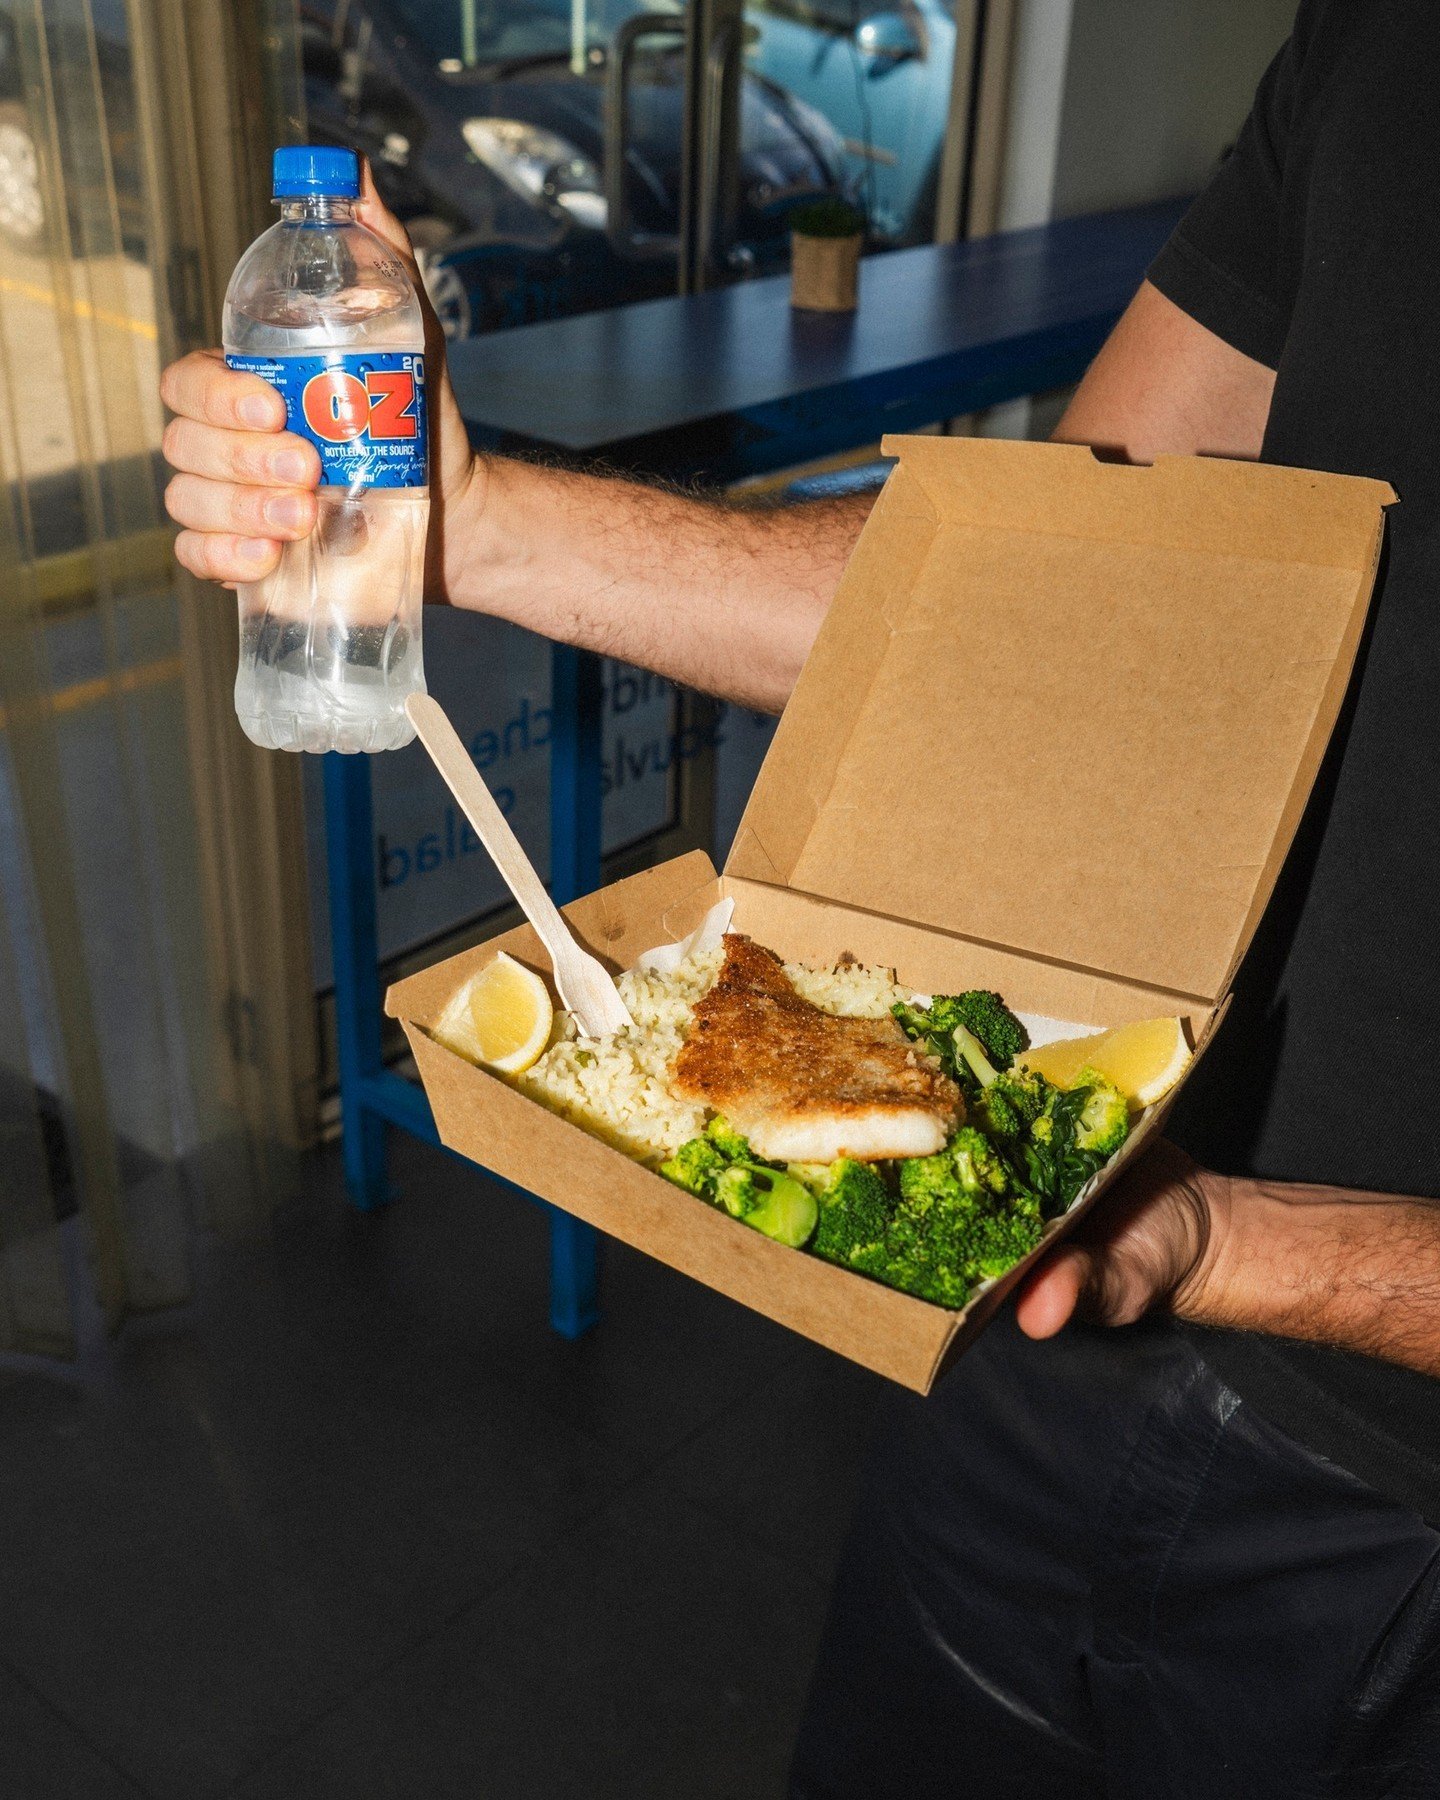 Hey there! You probably know us for our fried fish and chip goodness, but did you know we have so many healthy and filling options at Shark Tank Seafood. ⁠
⁠
Try our new meal deals, packed with nutrition ft. flake, steamed rice and greens!⁠
⁠
Open 11